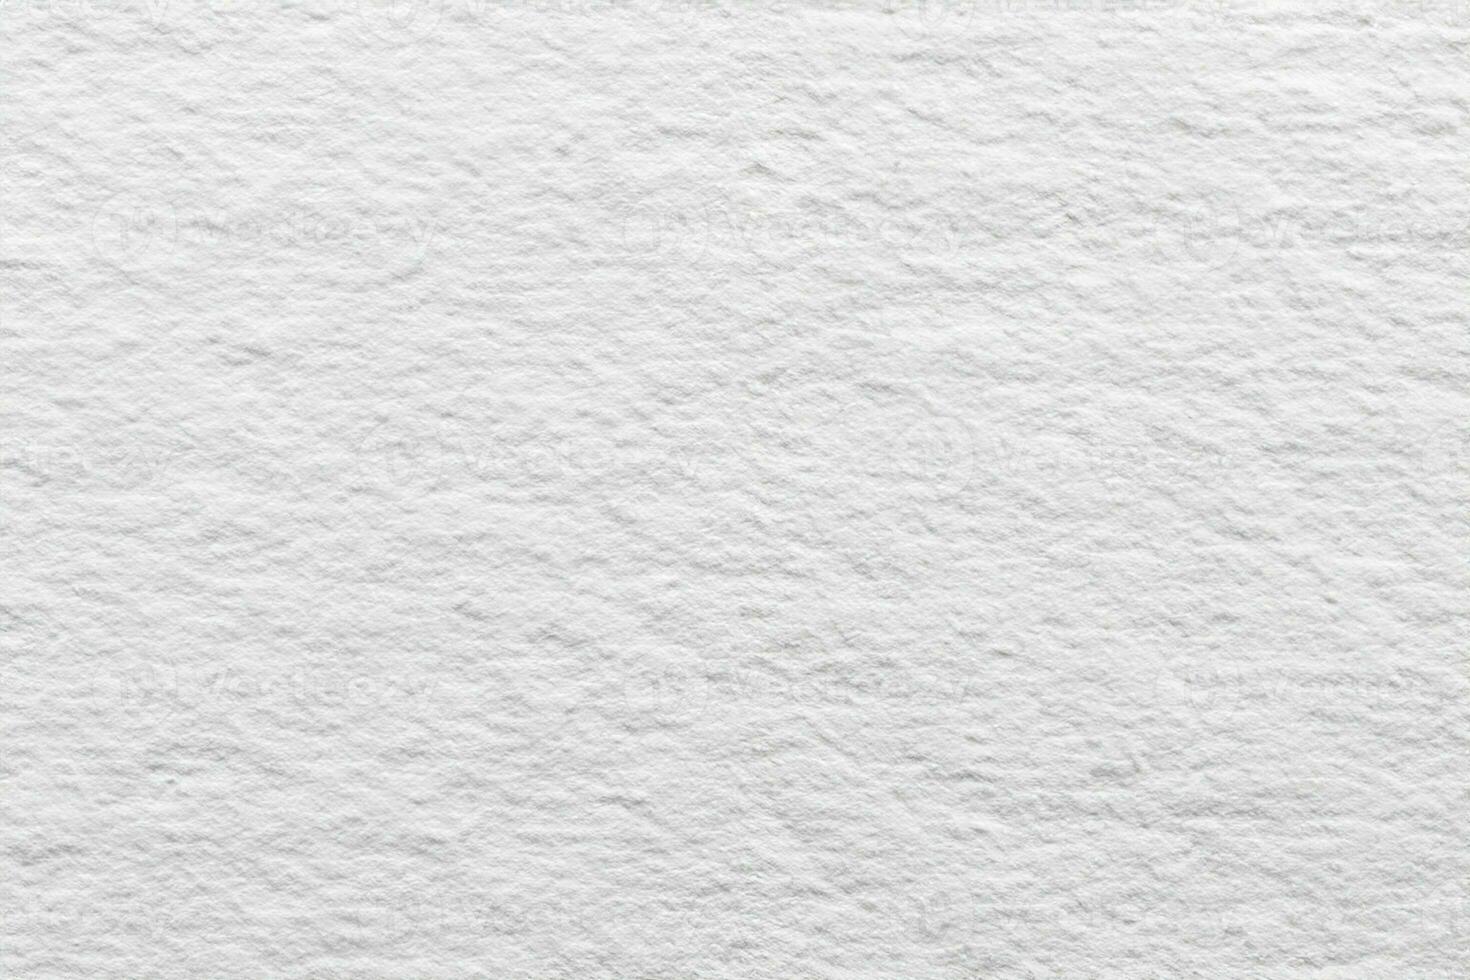 White paper texture background simple surface used us backdrop or products design photo